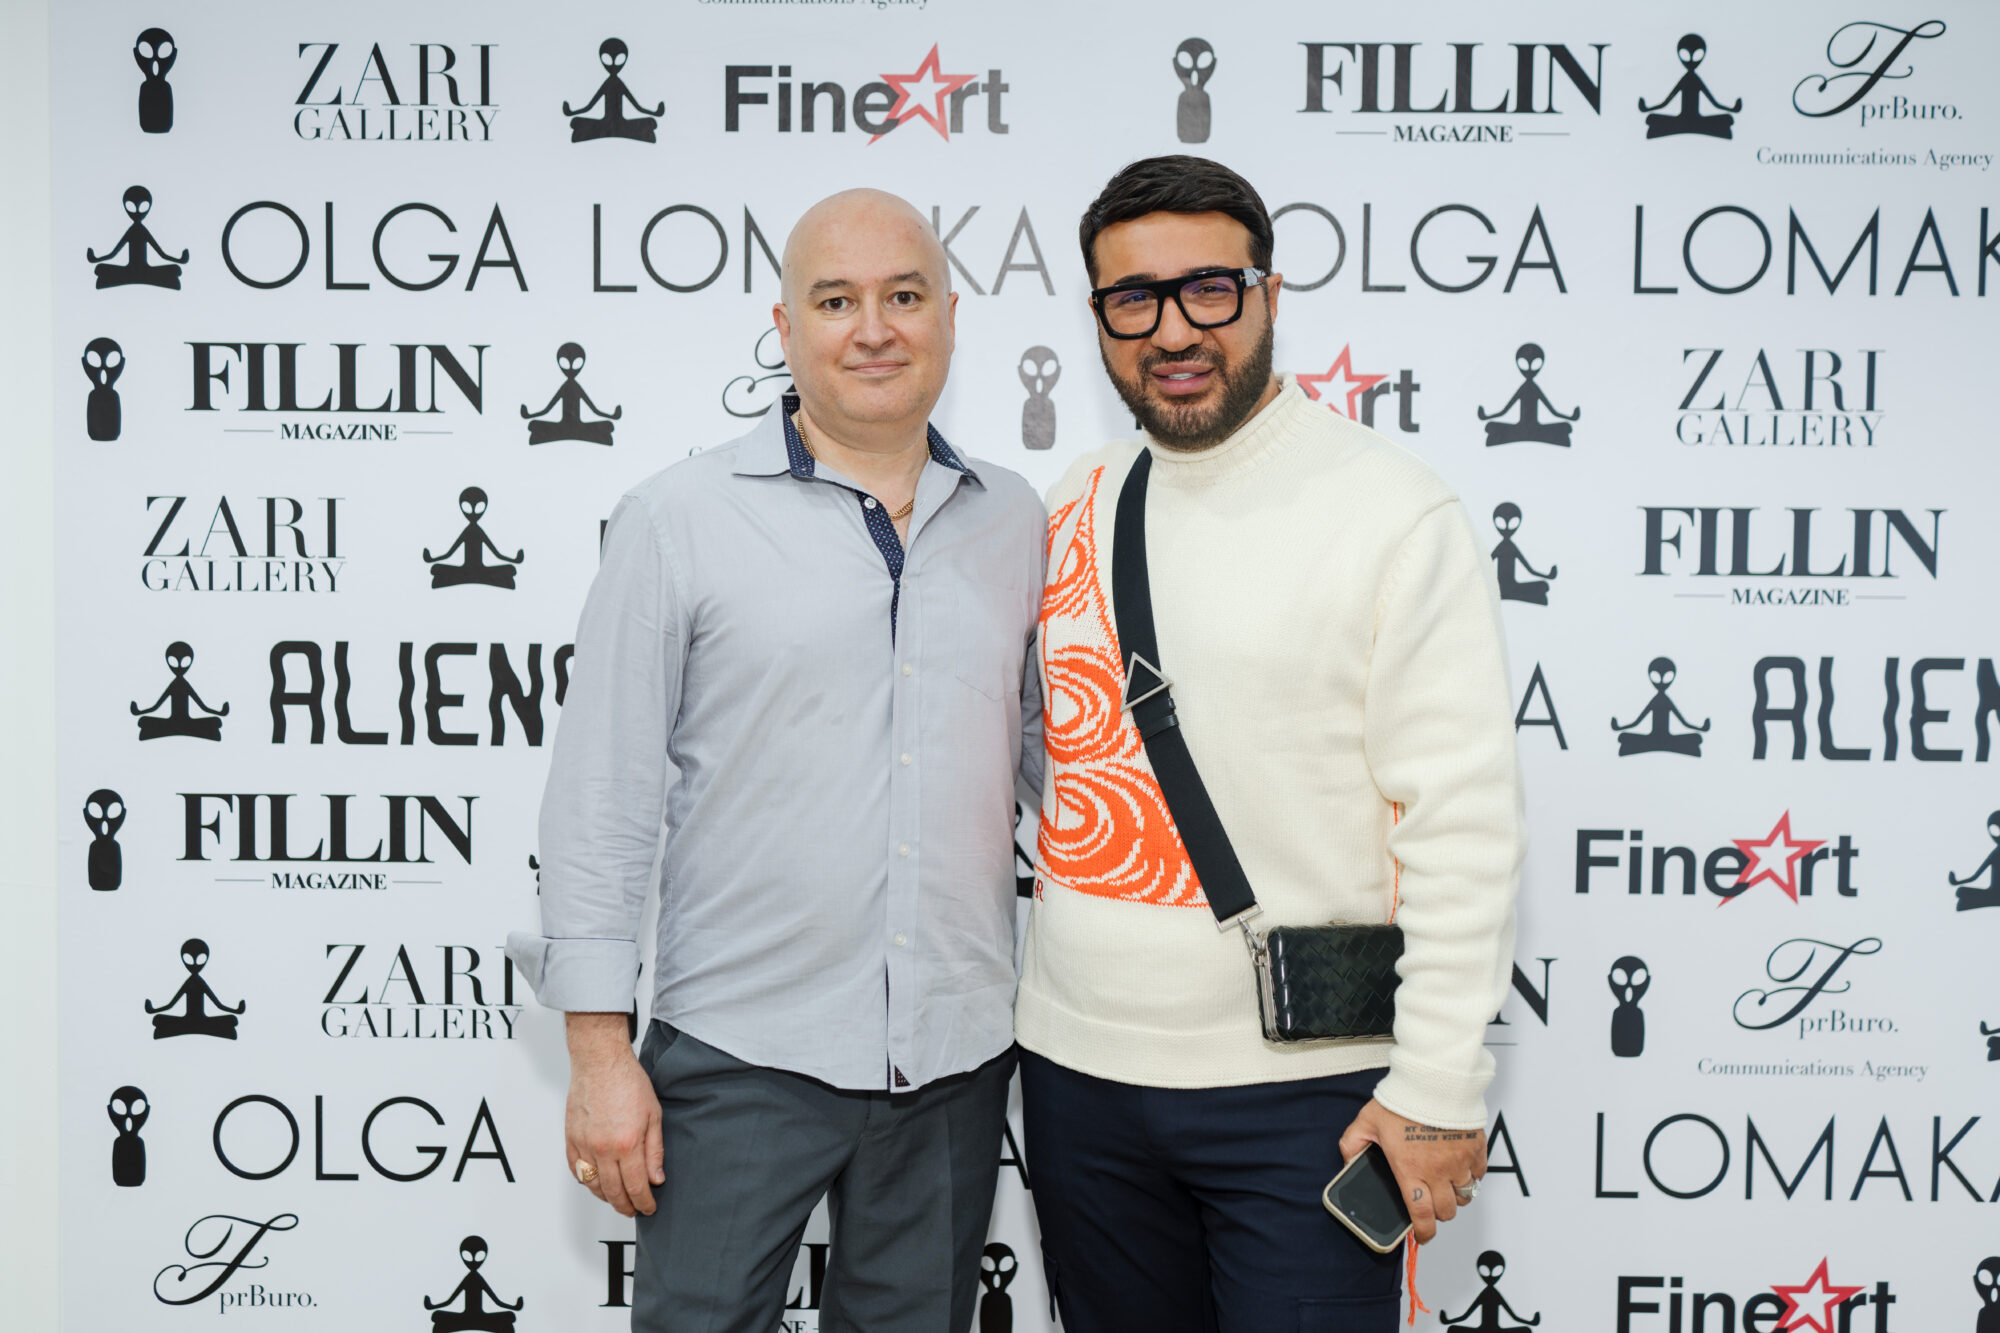 Creative Director of Zari Gallery, Rinald Mamashev and CEO and Founder of FprBuro Communications Agency, Dmitry Chograshi